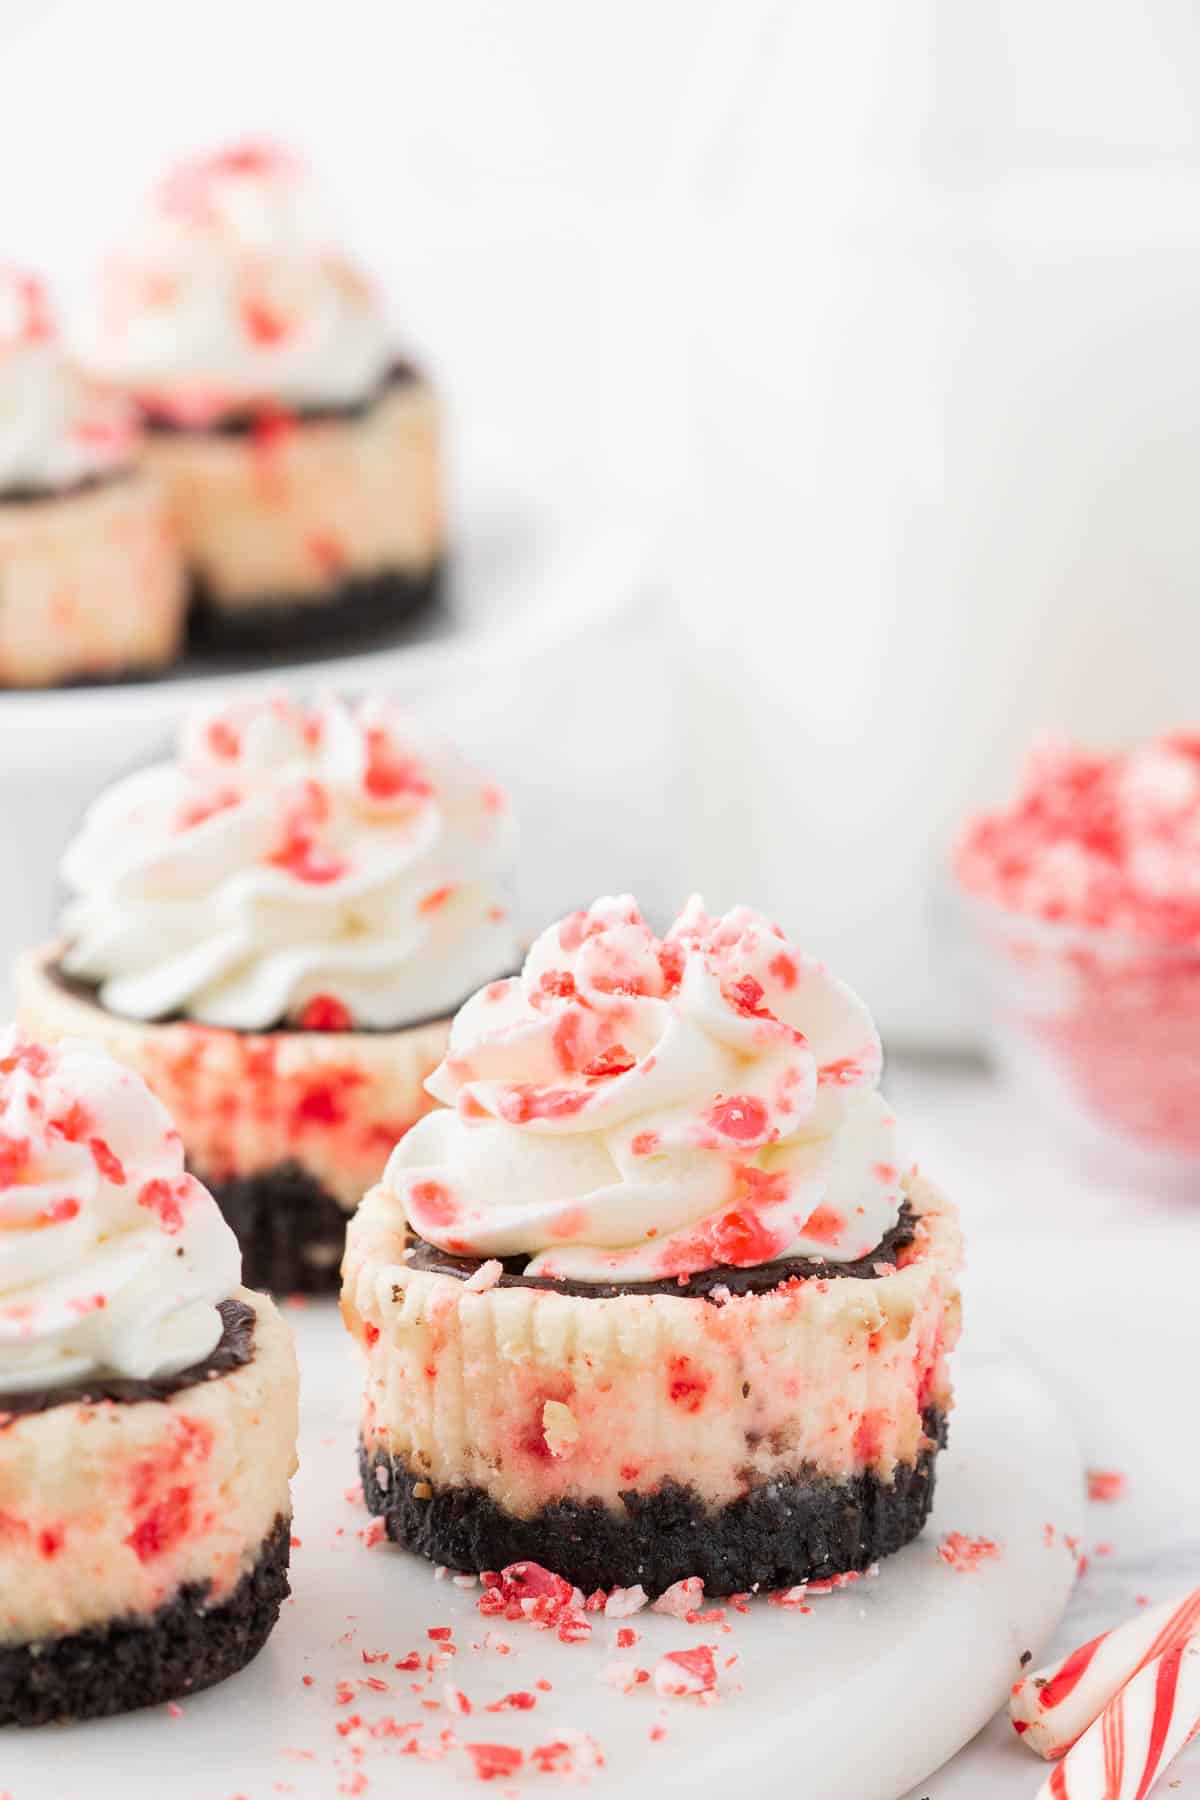 Mini white chocolate peppermint cheesecakes with chocolate ganache and crushed candy canes.